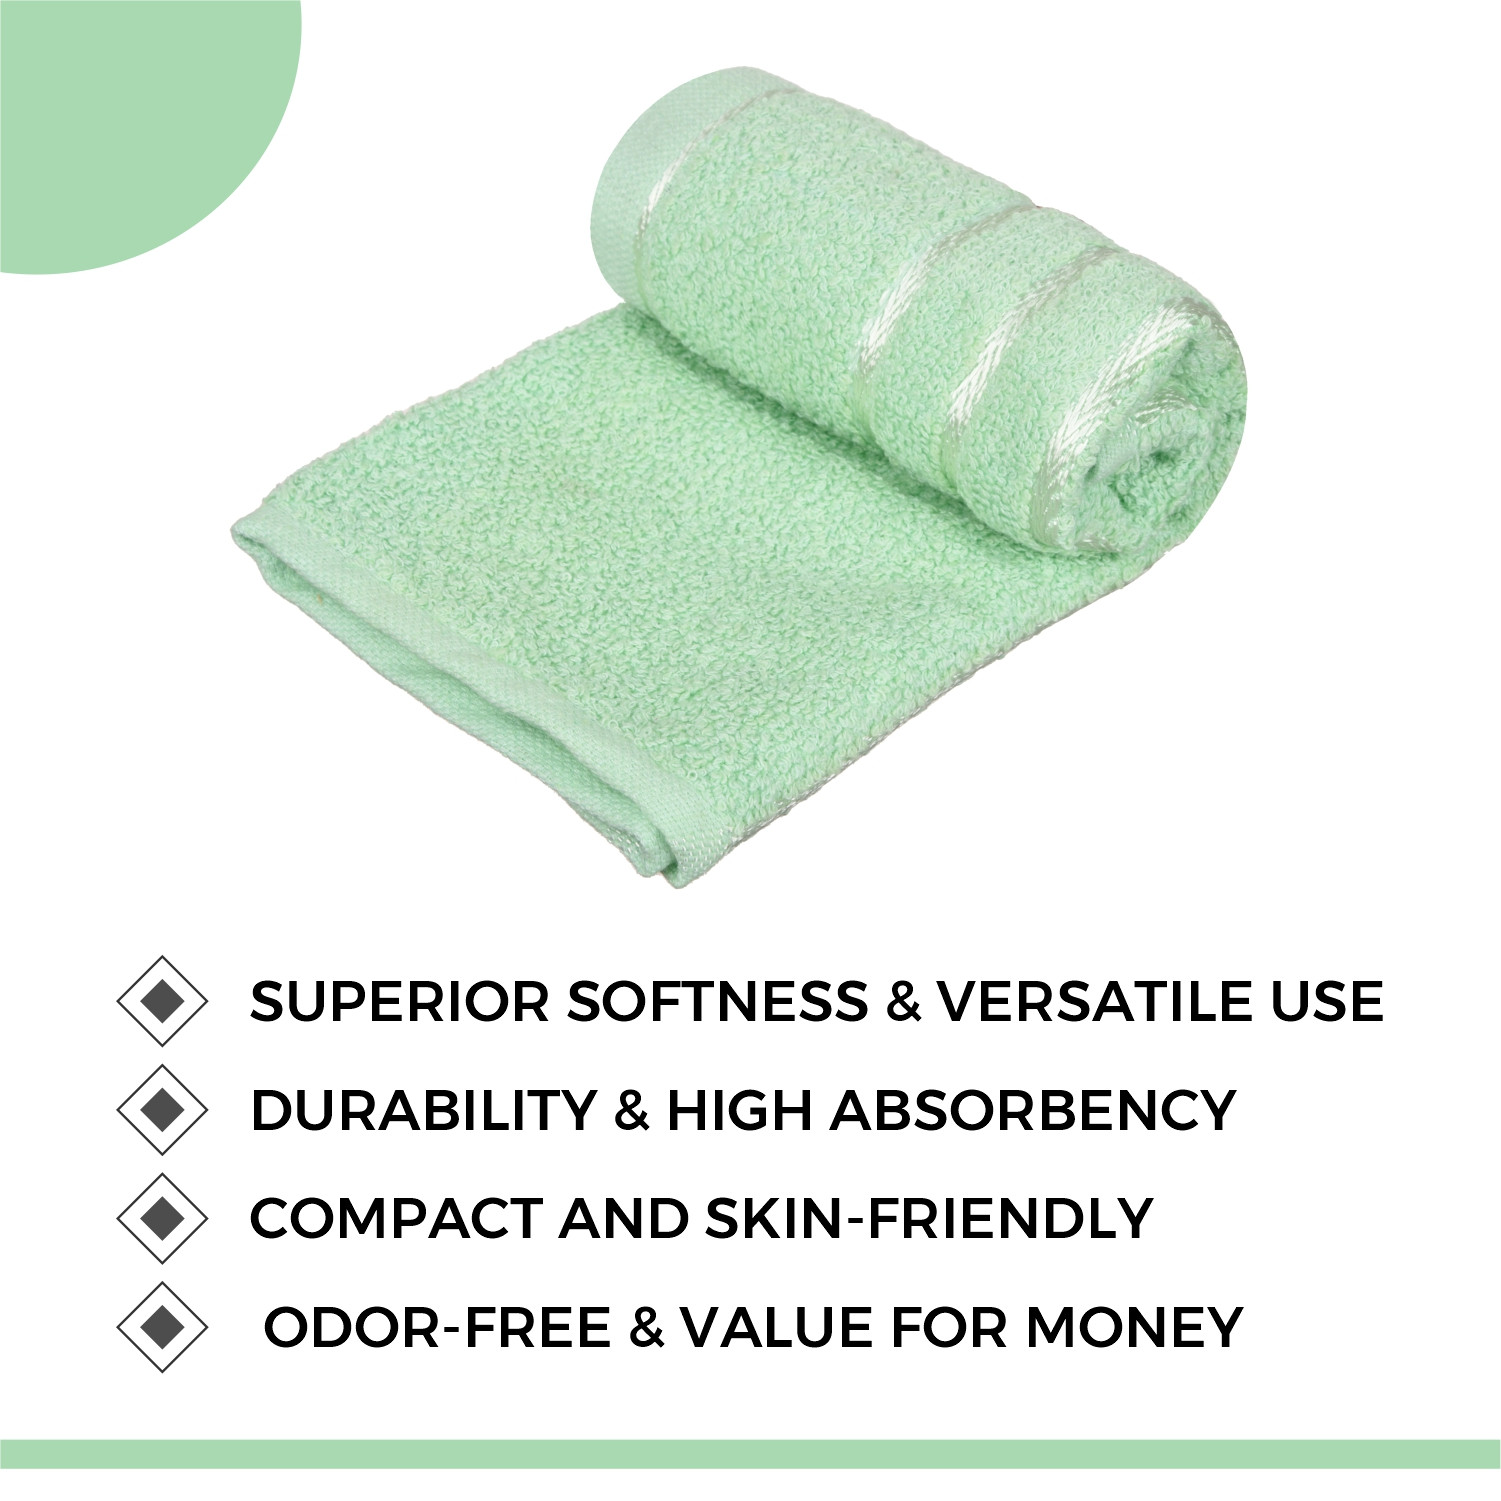 Kuber Industries Face Towel | Towels for Facewash | Towels for Gym | Facewash for Travel | Towels for Daily use | Workout Hand Towel | Lining Design | 14x21 Inch|Green